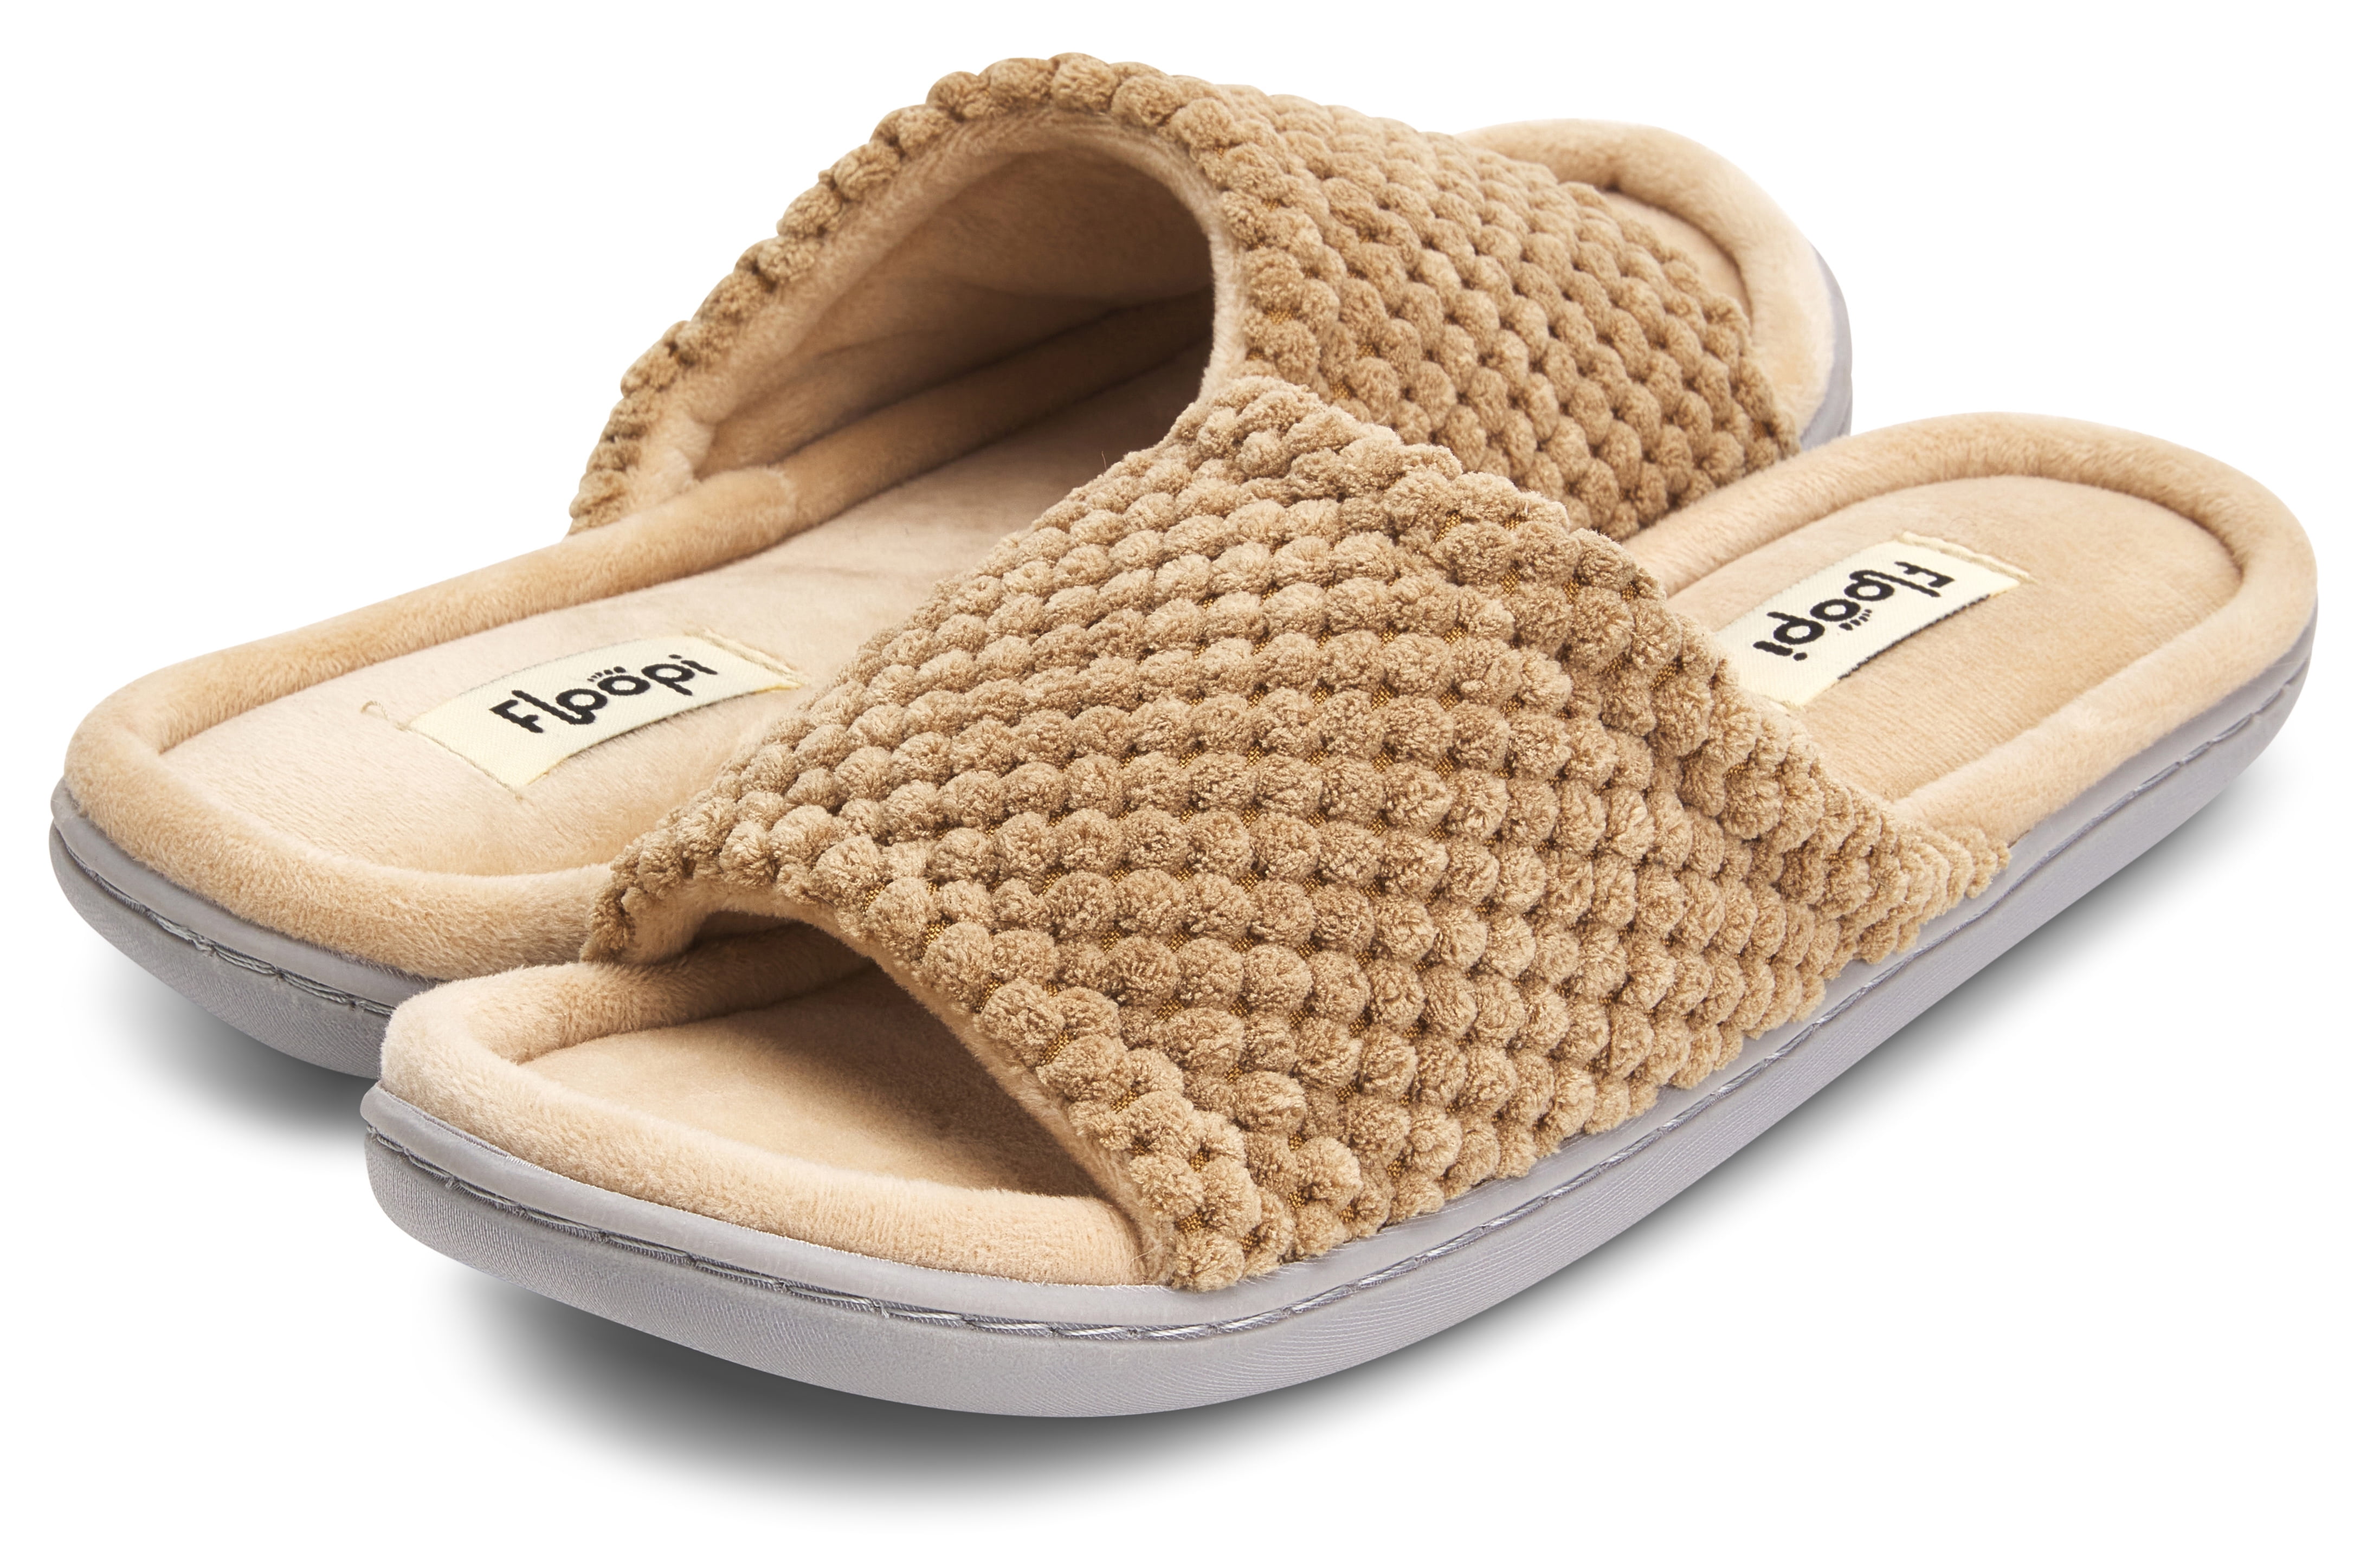 TELLW Lady Mens Linen Cotton Hemp Breathable Light Summer Spring Autumn Indoor Holiday Slippers